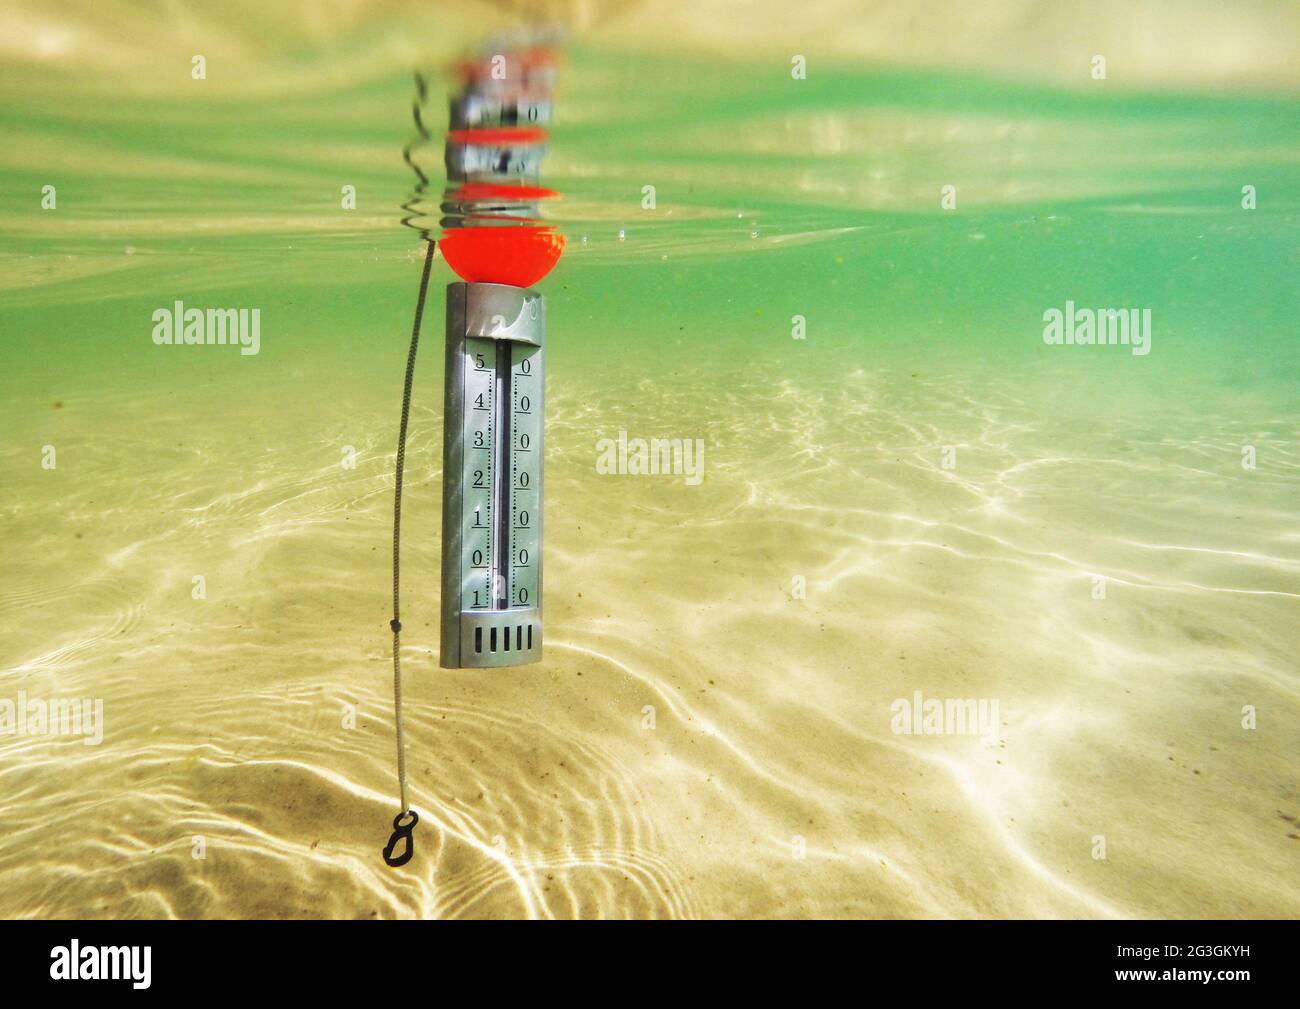 https://c8.alamy.com/comp/2G3GKYH/swimming-thermometer-in-a-lake-2G3GKYH.jpg